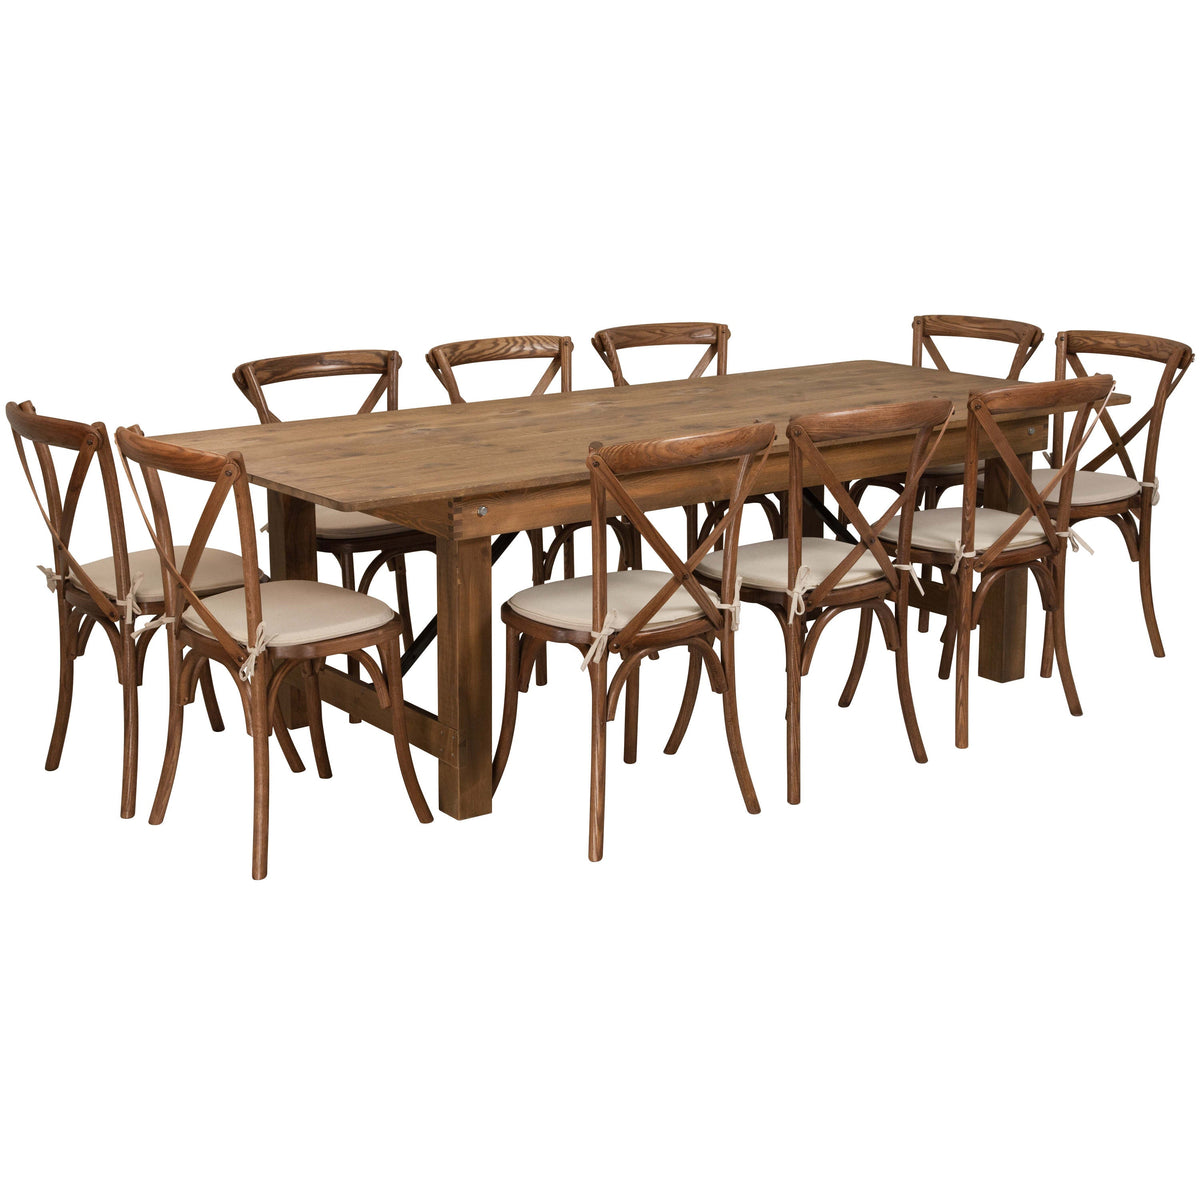 8' x 40inch Rustic Folding Farm Table Set with 10 Cross Back Chairs and Cushions